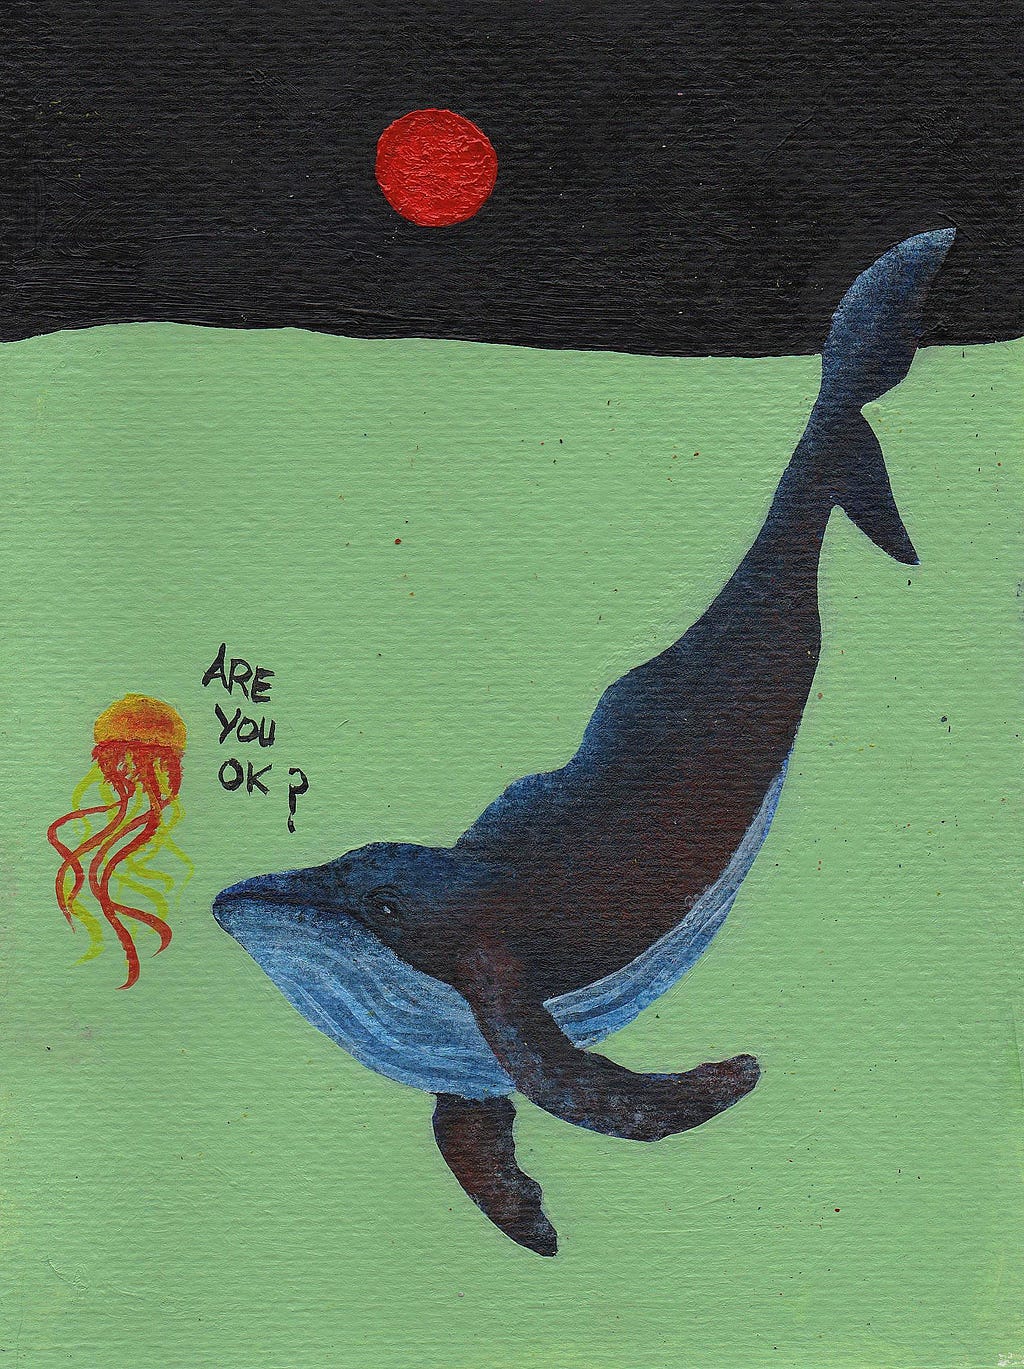 A painting of a jelly fish, asking a Whale if they are ok